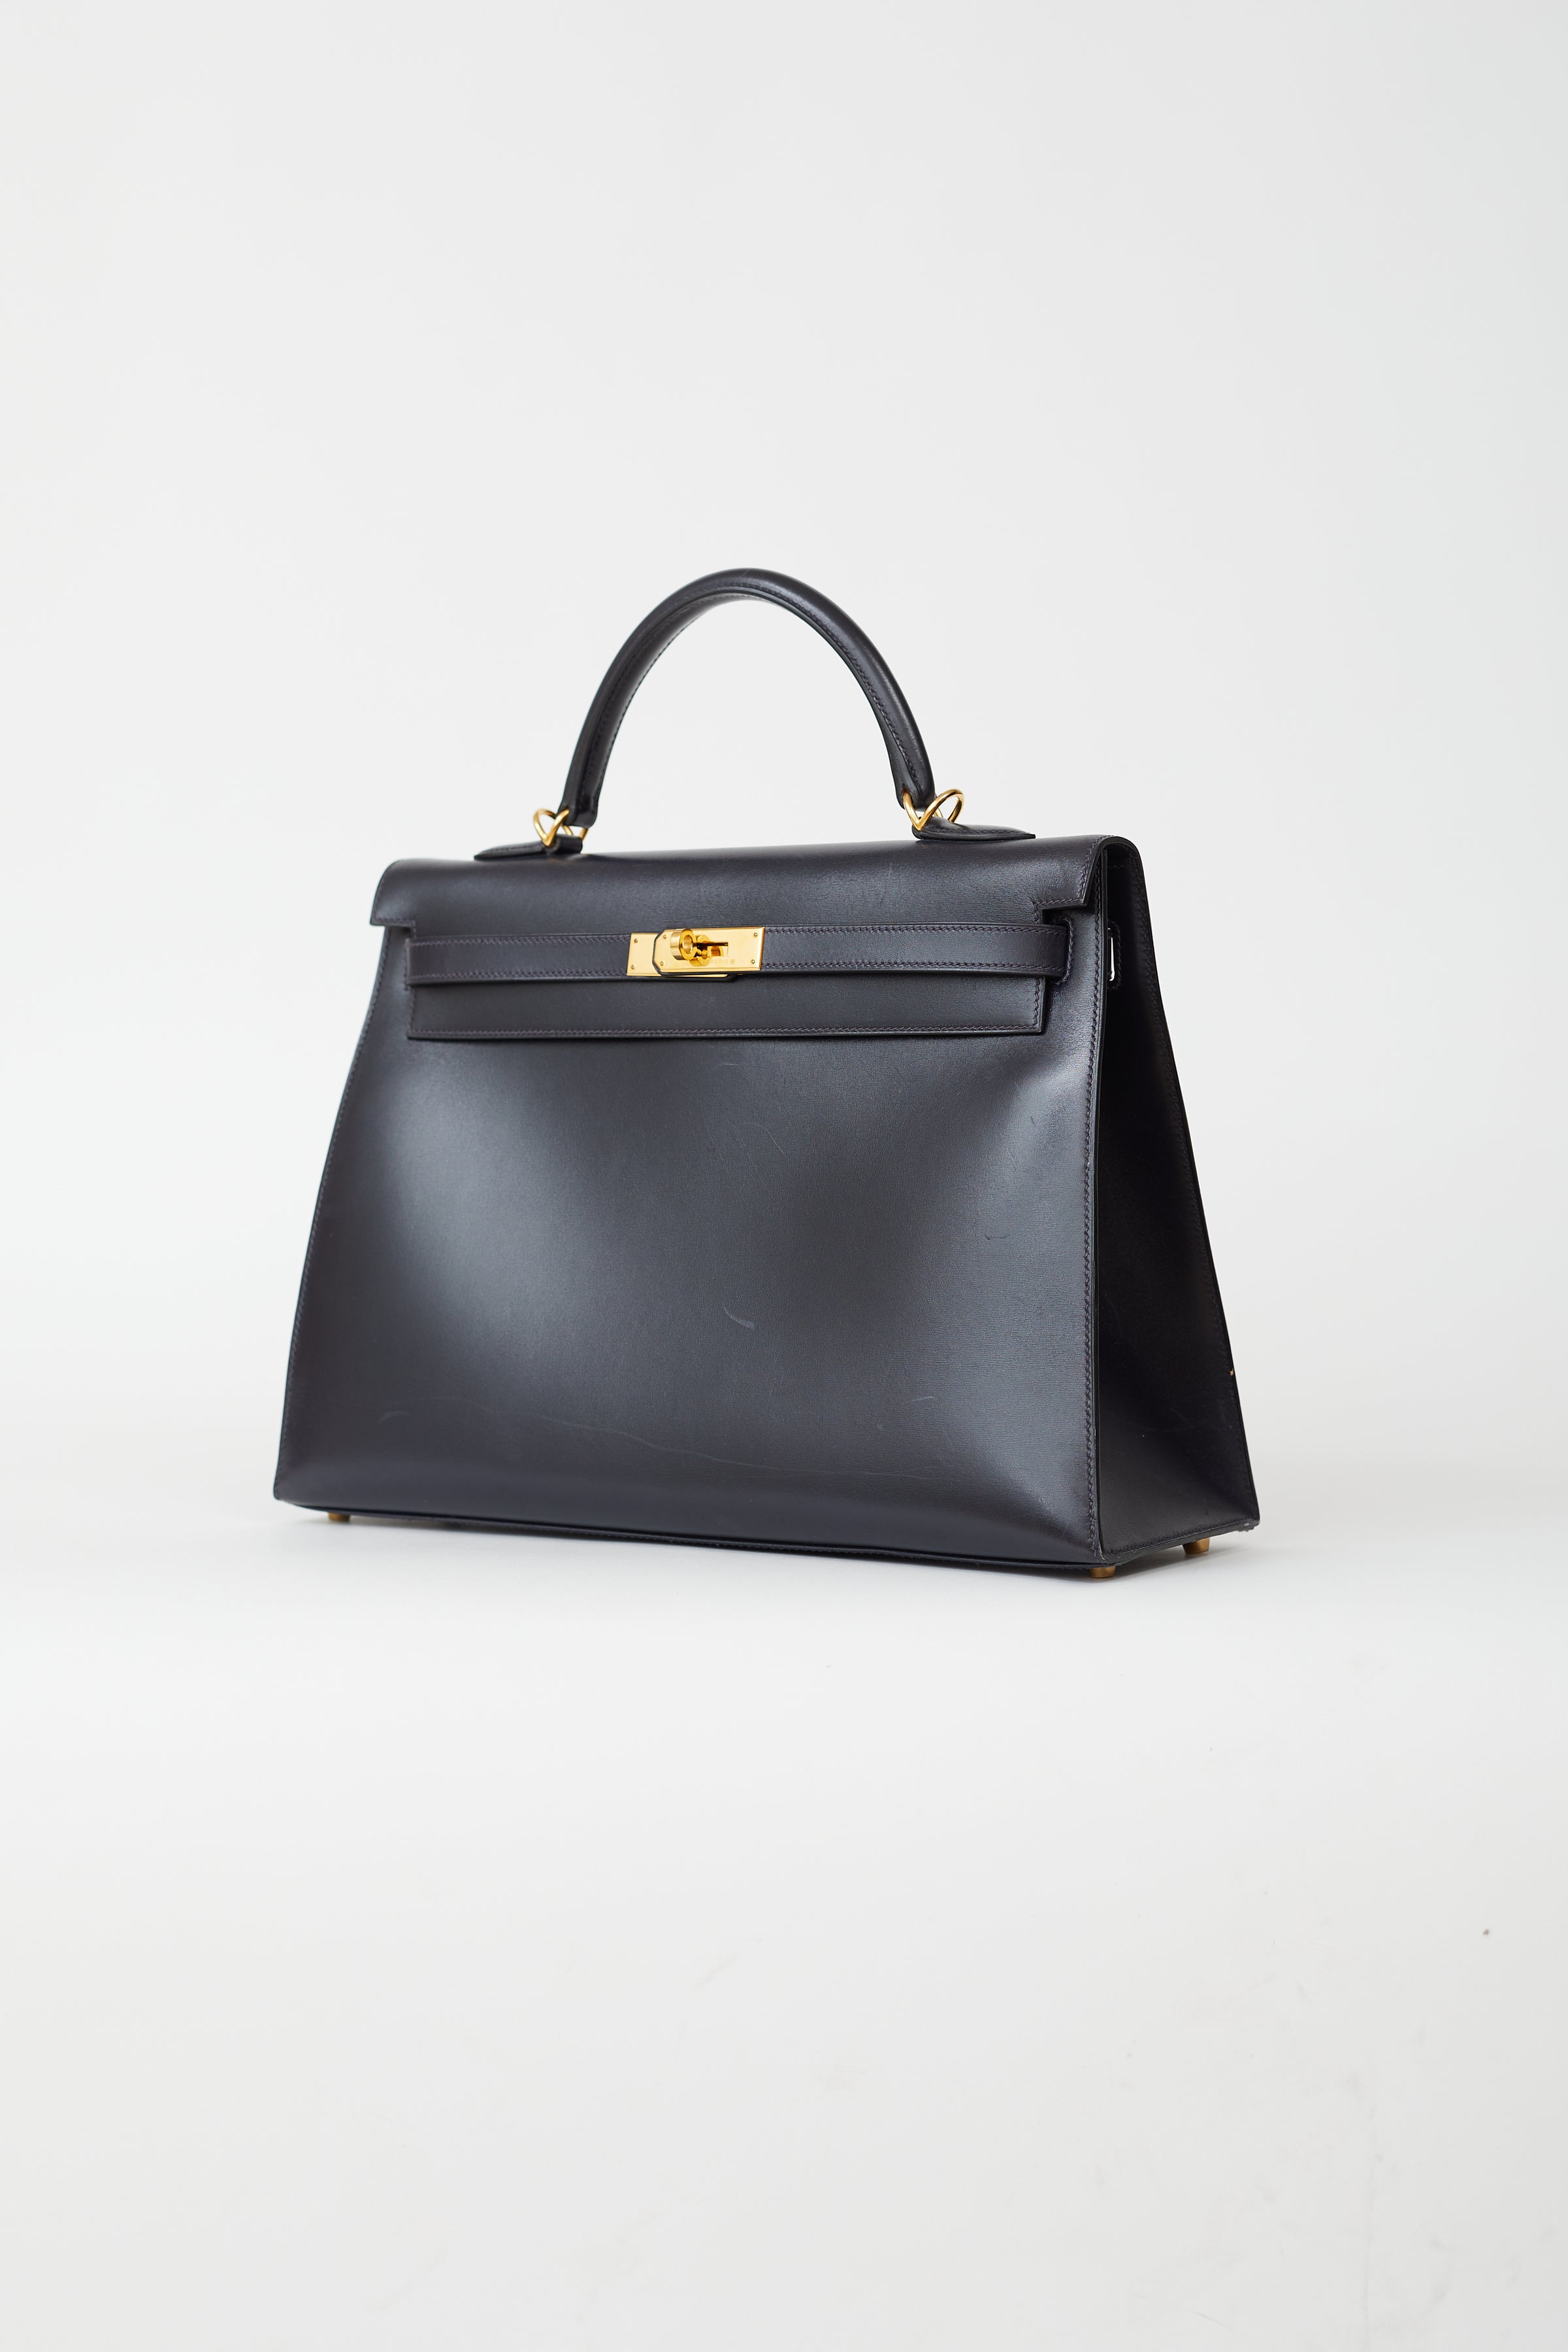 HERMÈS, BRIQUE KELLY SELLIER 35 IN BOX LEATHER, 2010, Handbags and  Accessories, 2020